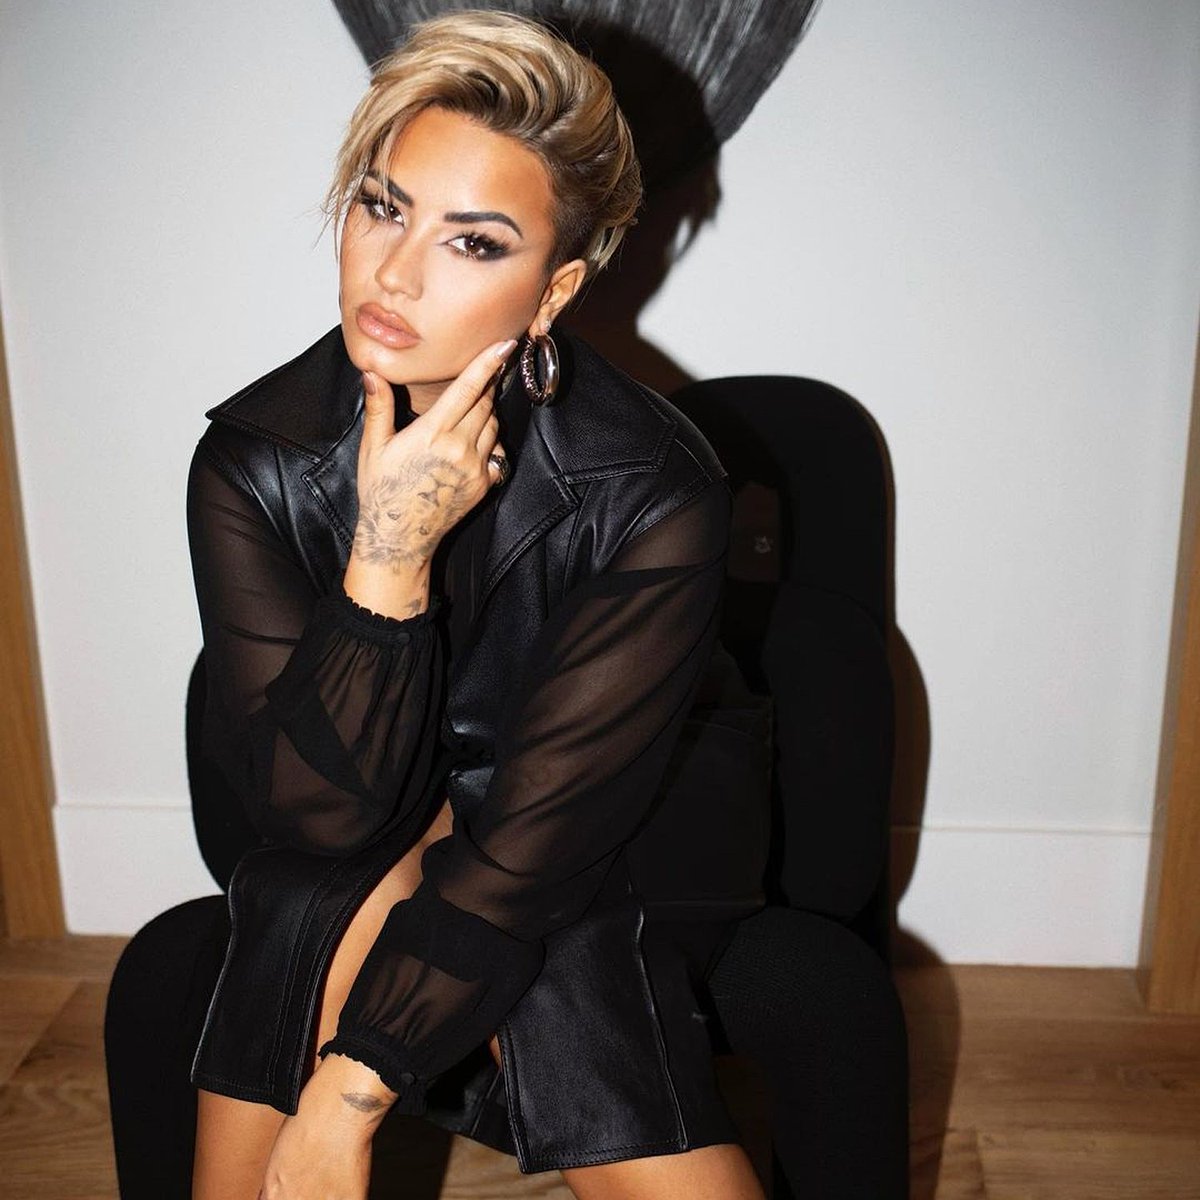 Demi Lovato – Bharani Moon – she has had a chaotic life. All of her hardships with herself have brought her closer to personal intimacy. In a lot of her songs she expresses her struggle with sobriety and love. Giving so much to someone and feeling cheated with the love in return.